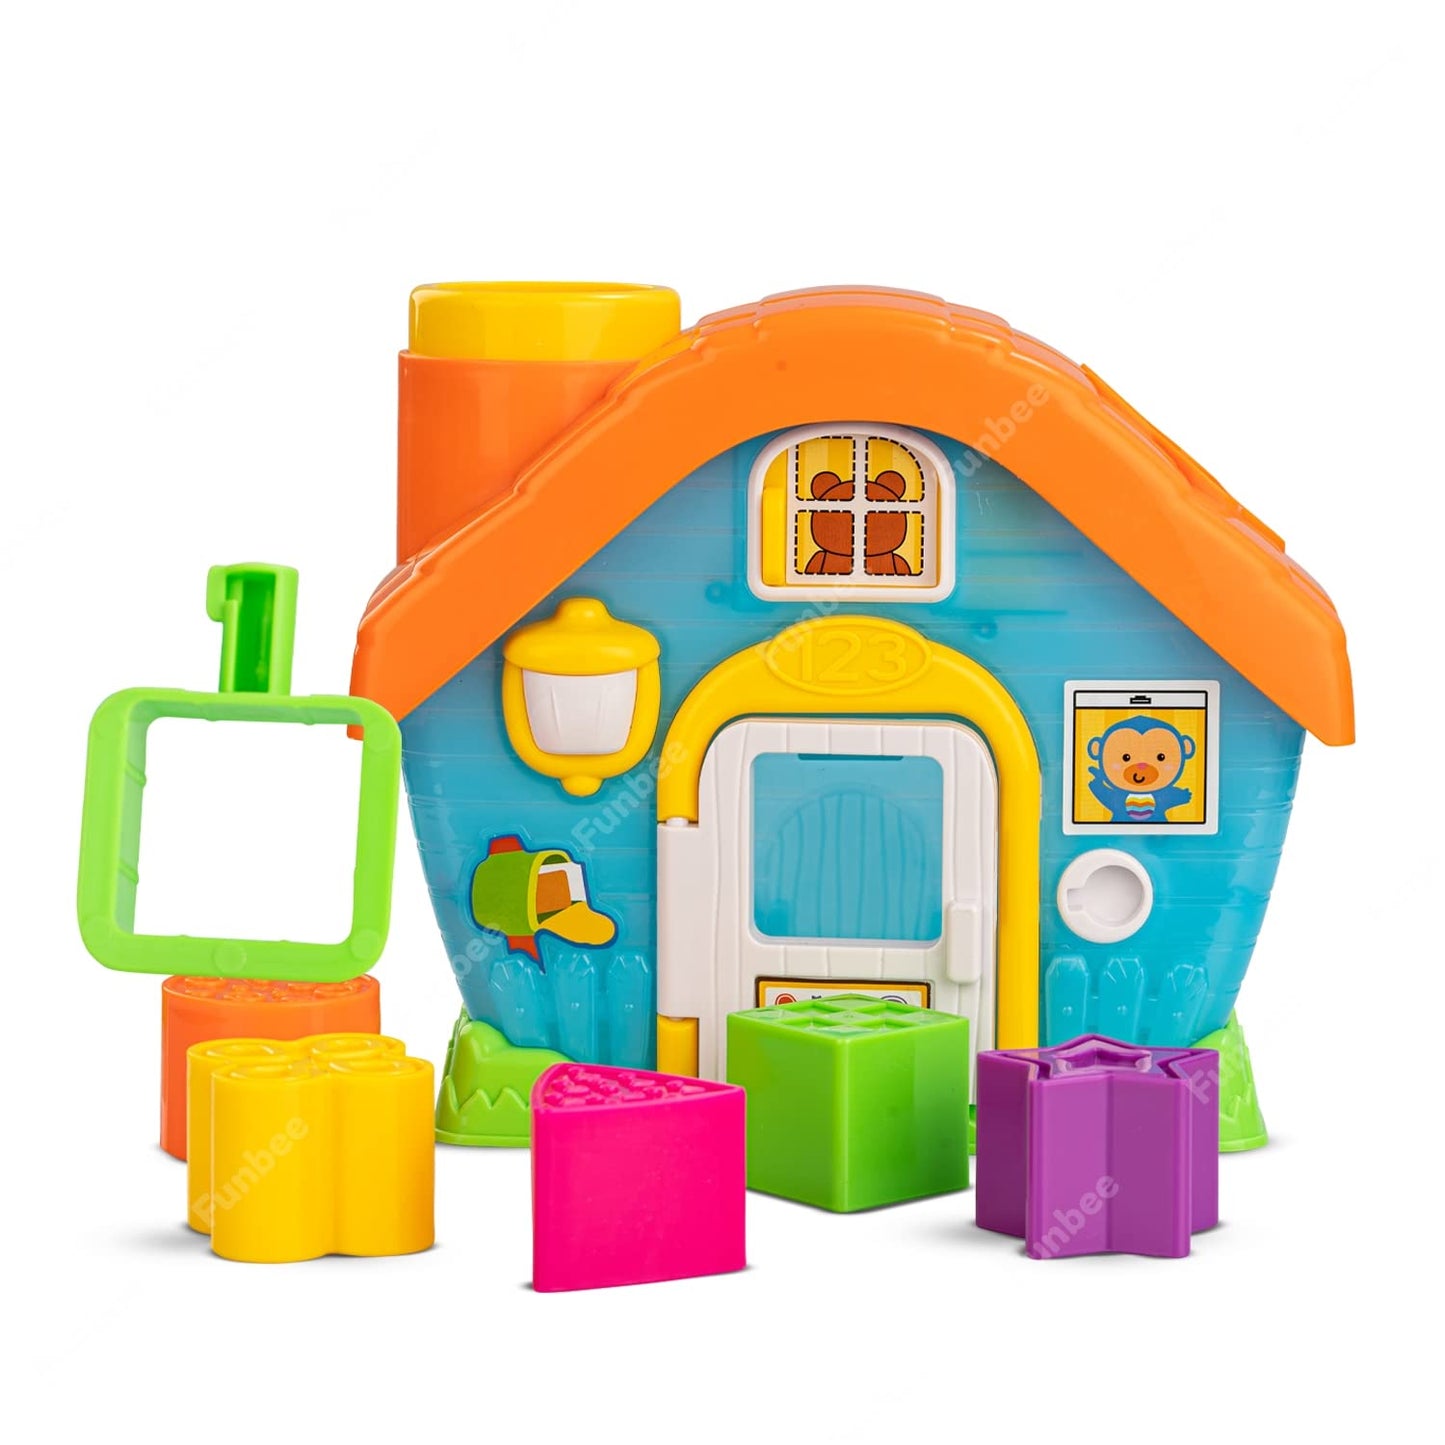 Baybee Infunbebe Shape Sorting House Toys for kids with 5 Colorful Blocks